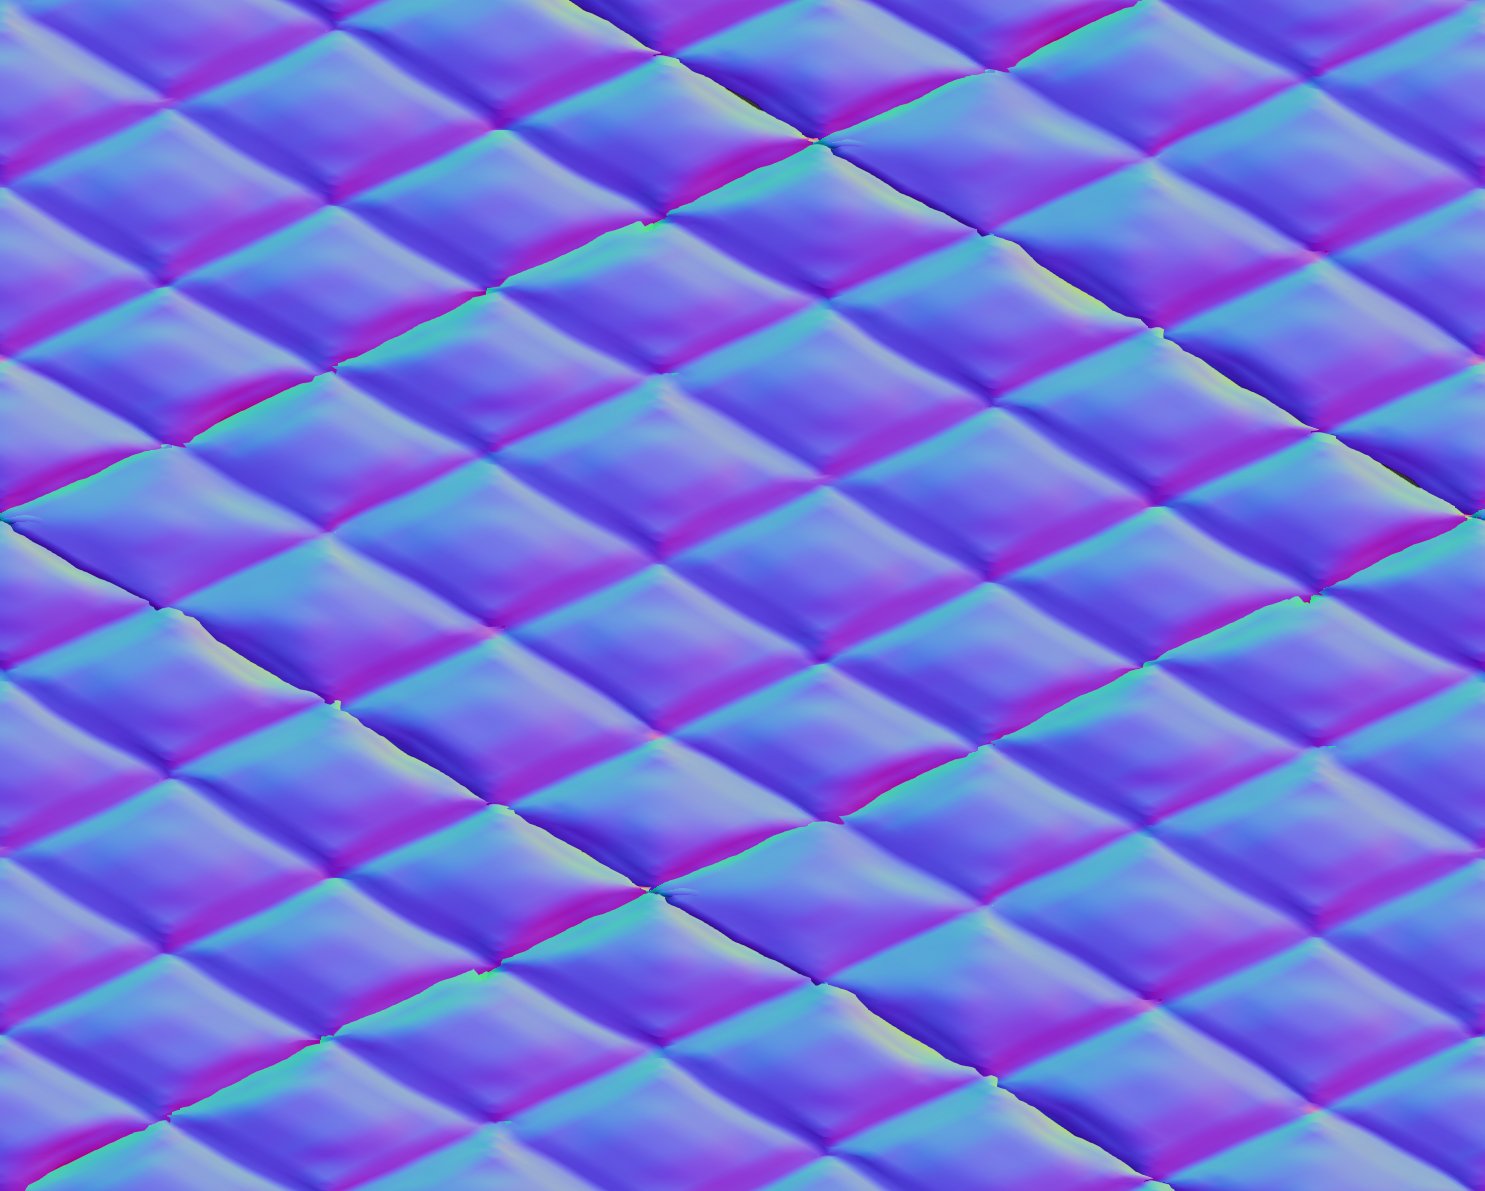 Ian Hubert on X: I did a (probably unnecessary) cloth sim for the quilted  fabric pattern in there, and rendered out a normal map if anyone wants it!  Works pretty well.  /